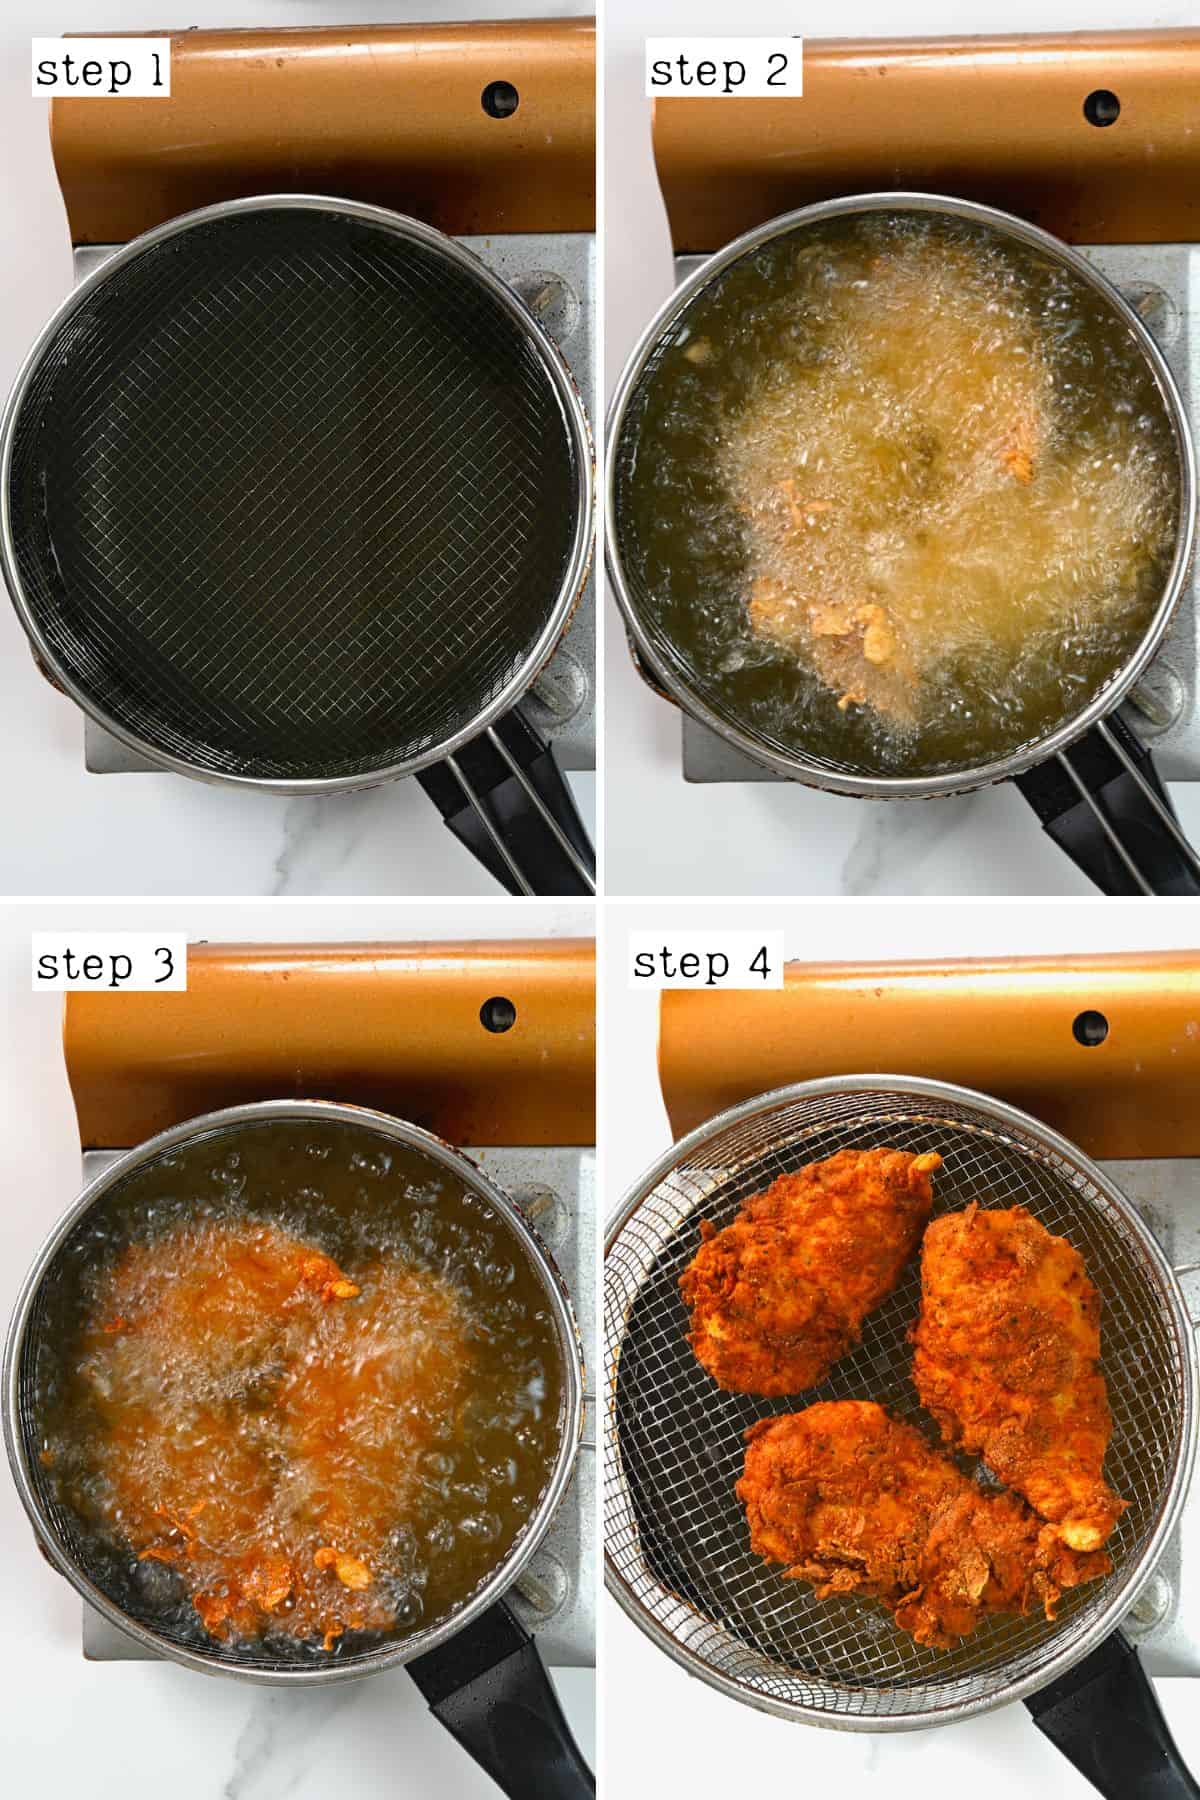 Steps for frying chicken